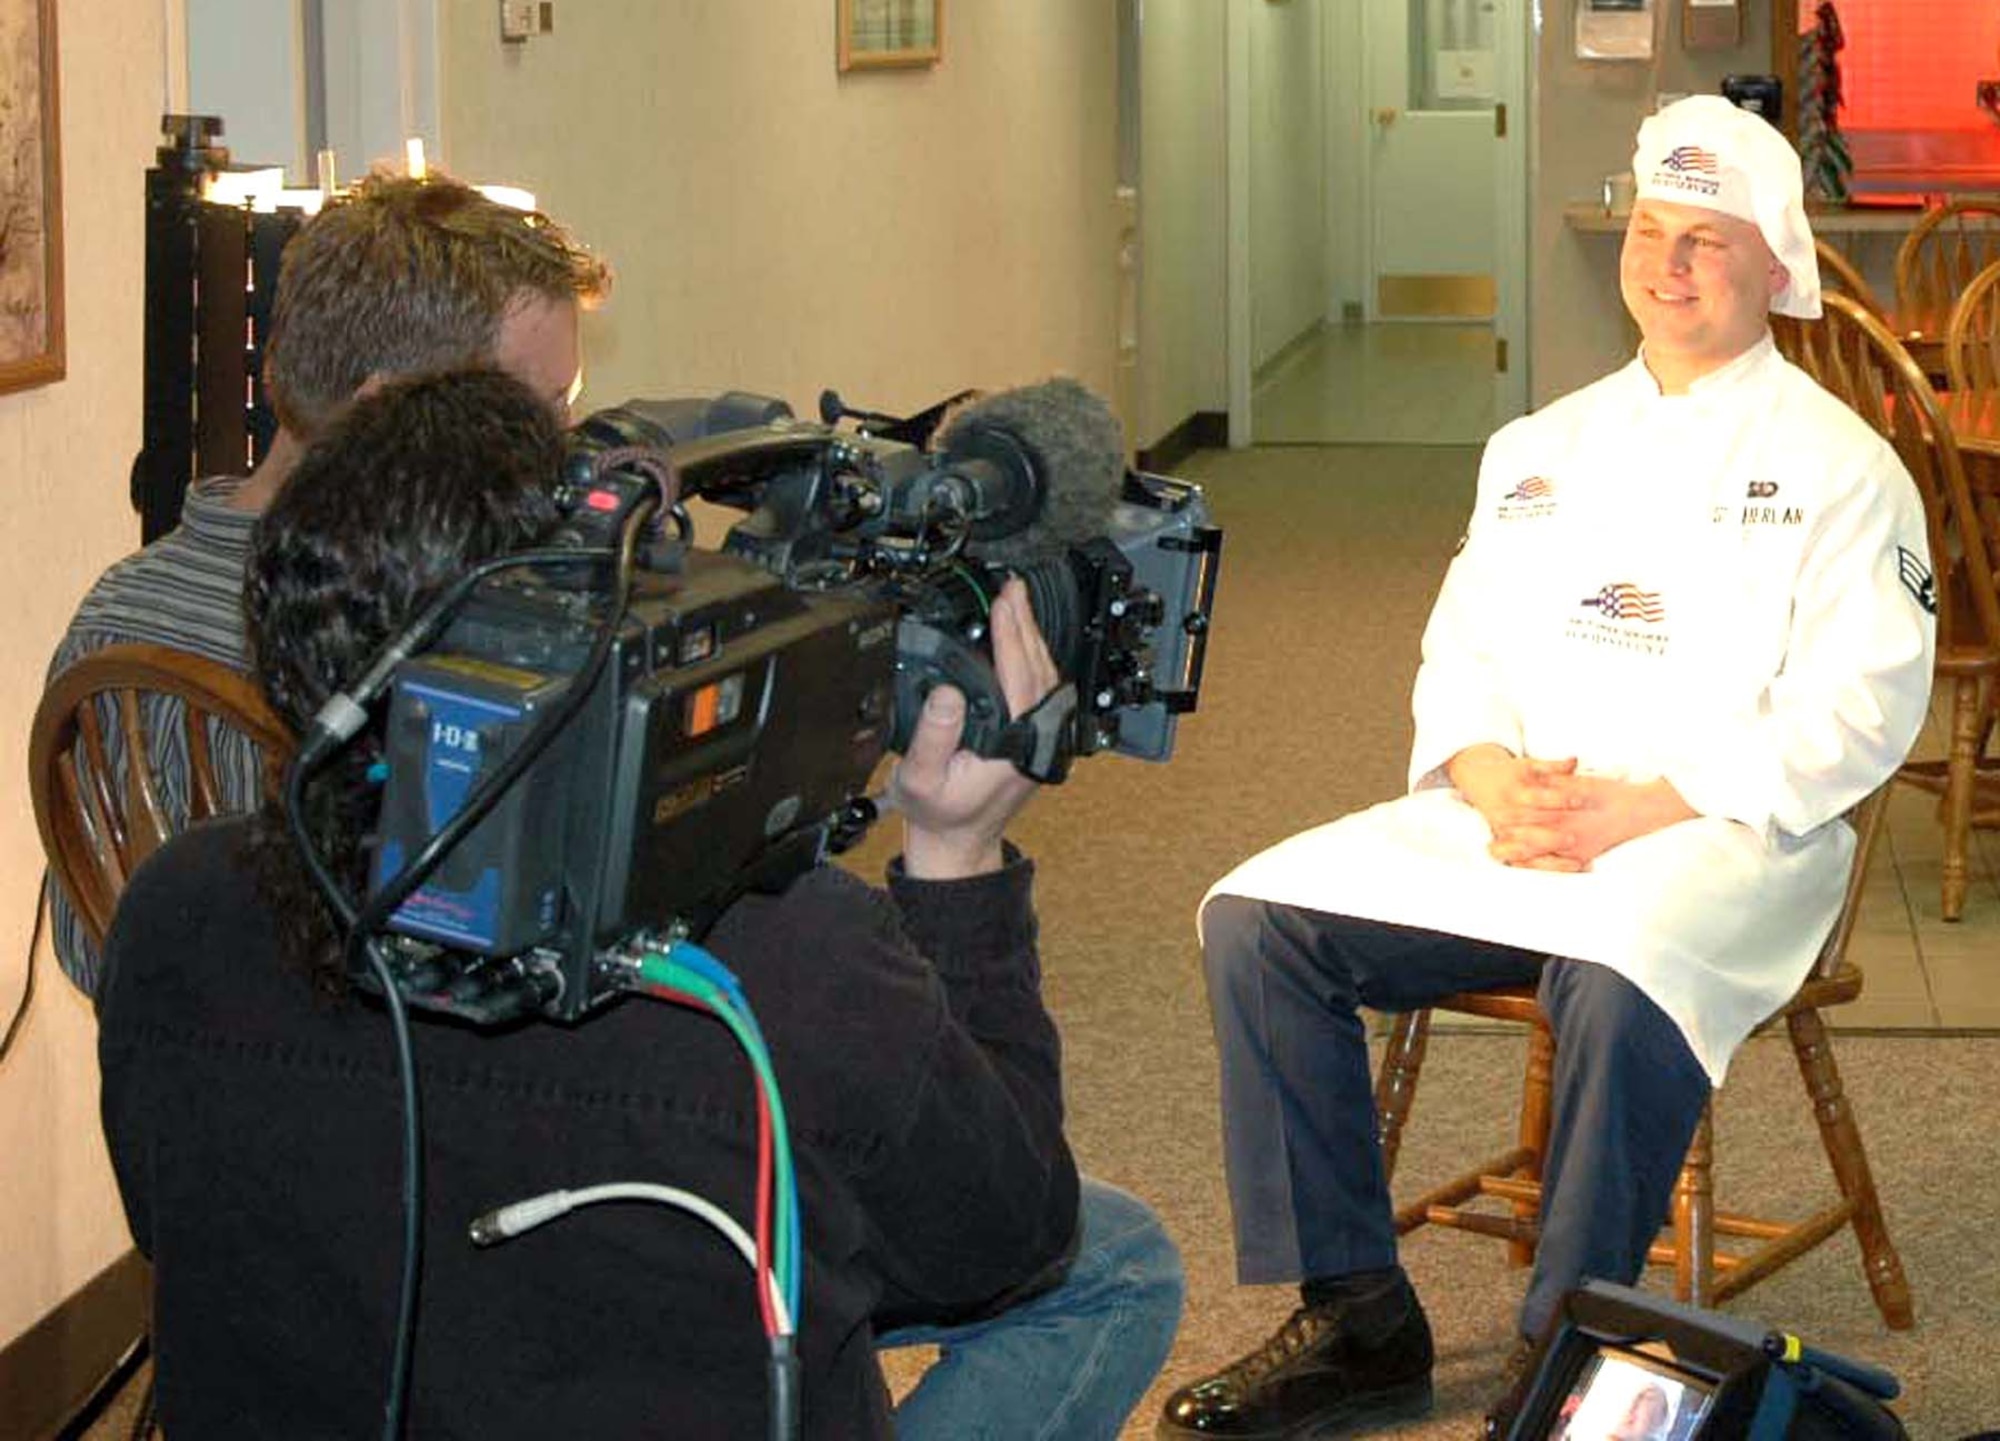 Senior Airman David Sutherland interviews with producer Dean Pedersen and cameraman Gary Feblowitz at I-01 missile alert facility Wednesday, March 15, 2006, as part of  a profile for the Food Network Challenge series.  The Airman competed against four others in the network's cookie challenge March 20 in Denver.  Airman Sutherland is a missile chef with the 741st Missile Squadron, Minot Air Force Base, N.D.  (U.S. Air Force photo/Maj. Dani Johnson)